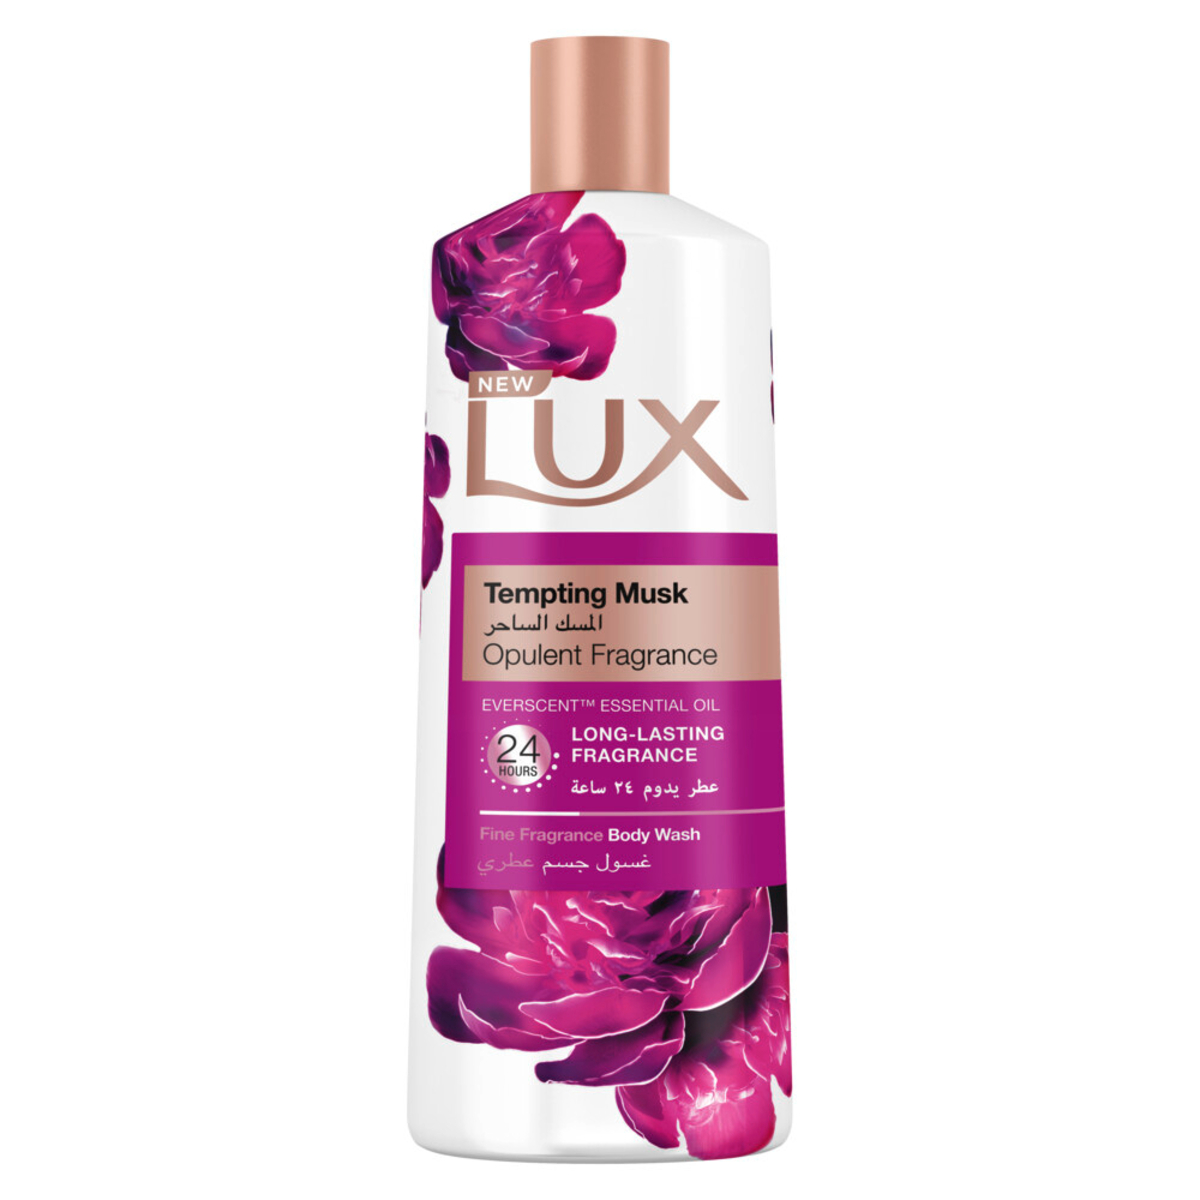 Lux Body Wash Tempting Musk Opulent Fragrance 500 ml